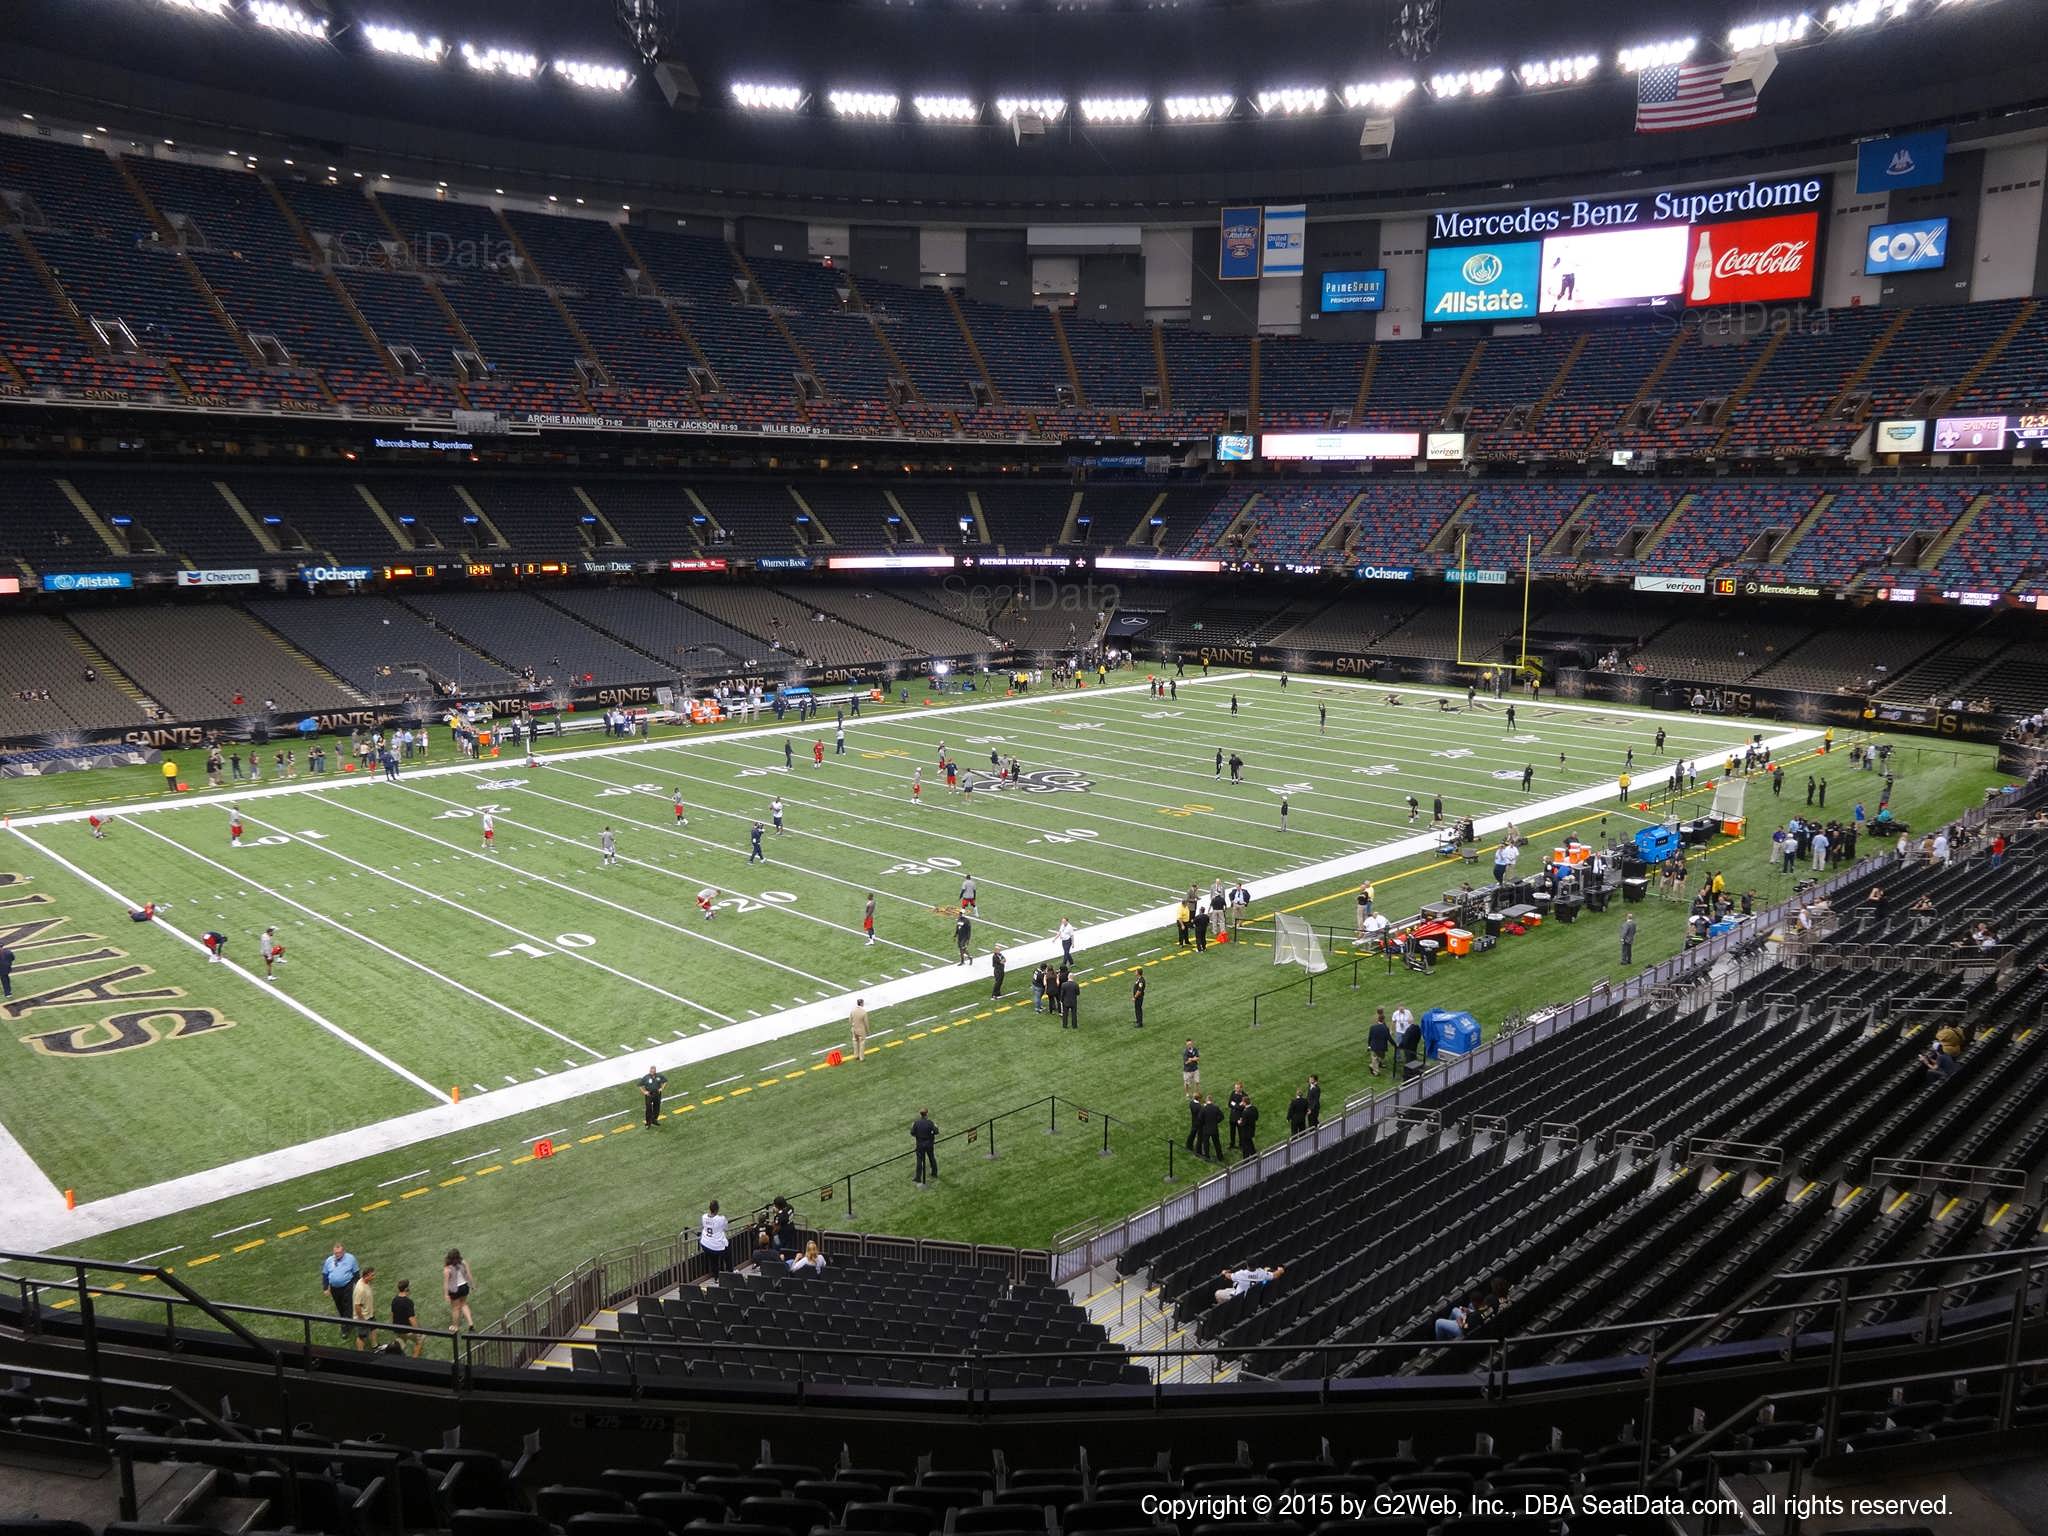 Seat view from section 342 at the Mercedes-Benz Superdome, home of the New Orleans Saints